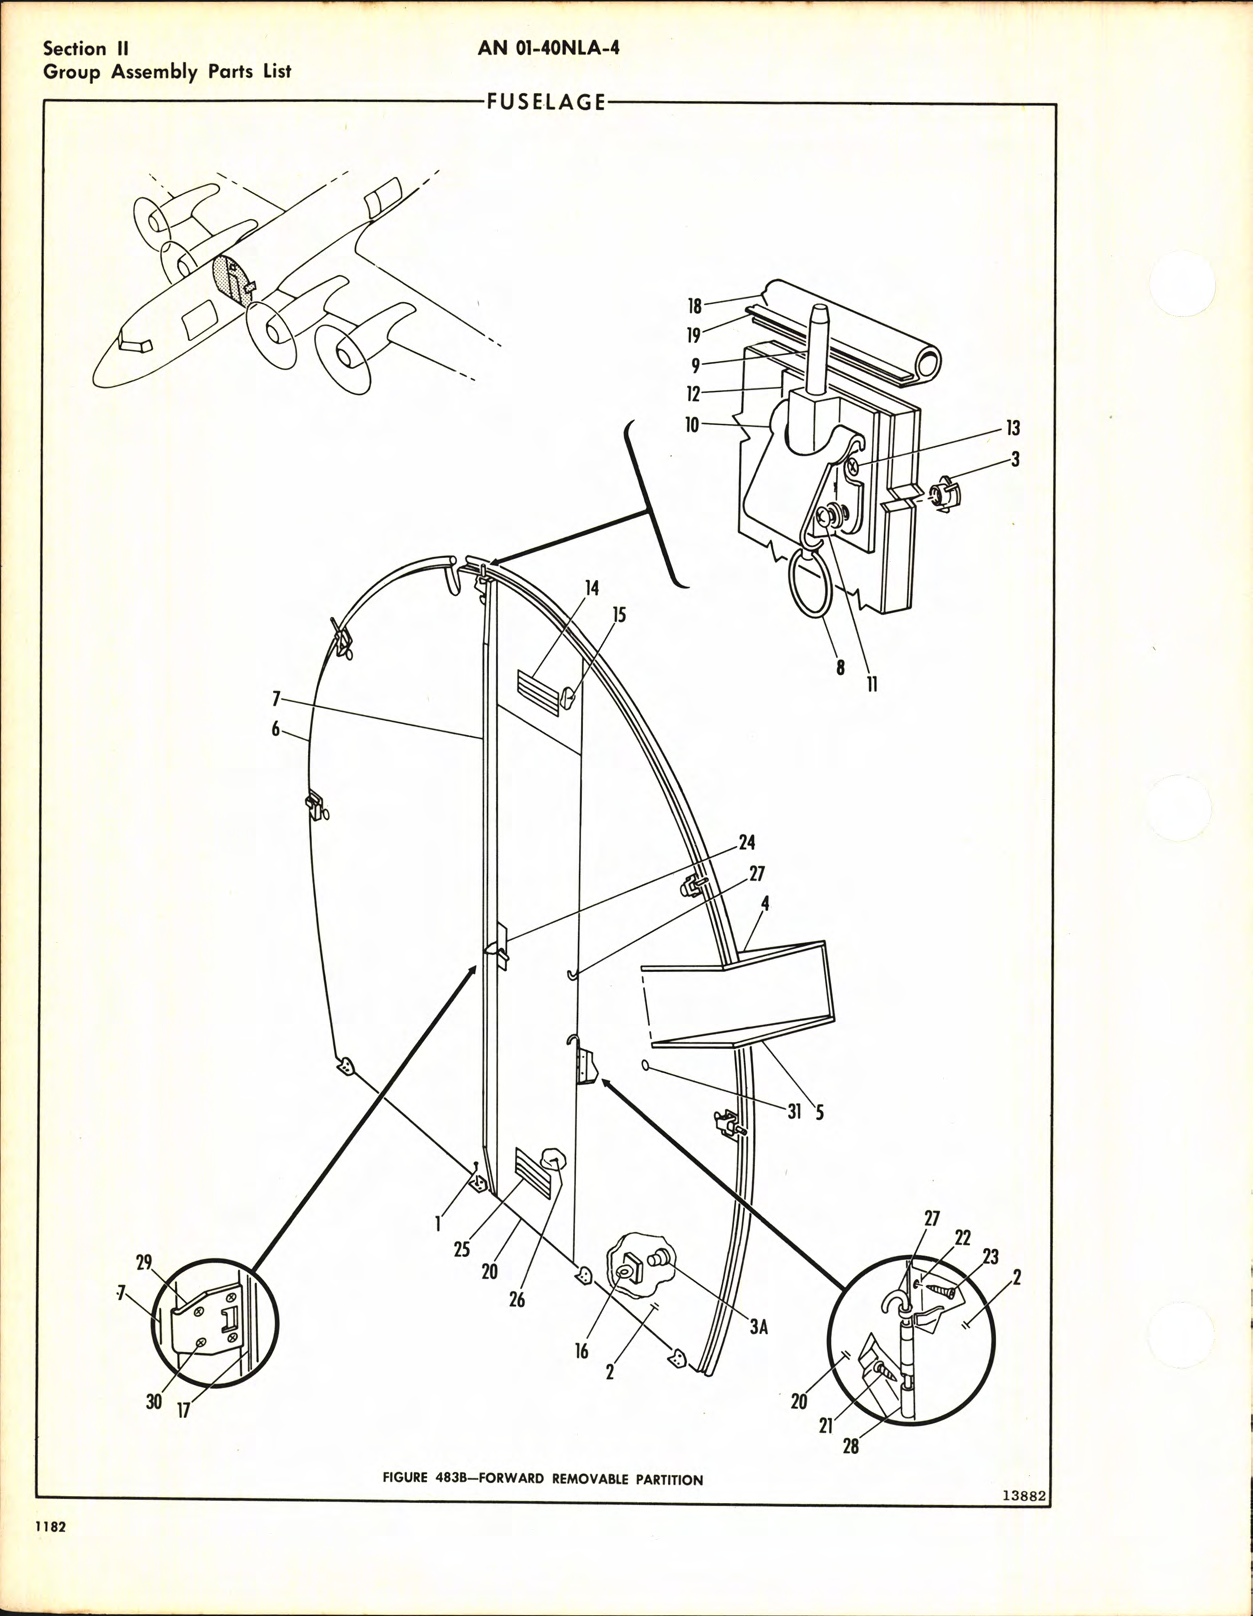 Sample page 8 from AirCorps Library document: Parts Catalog for DC-6 Series